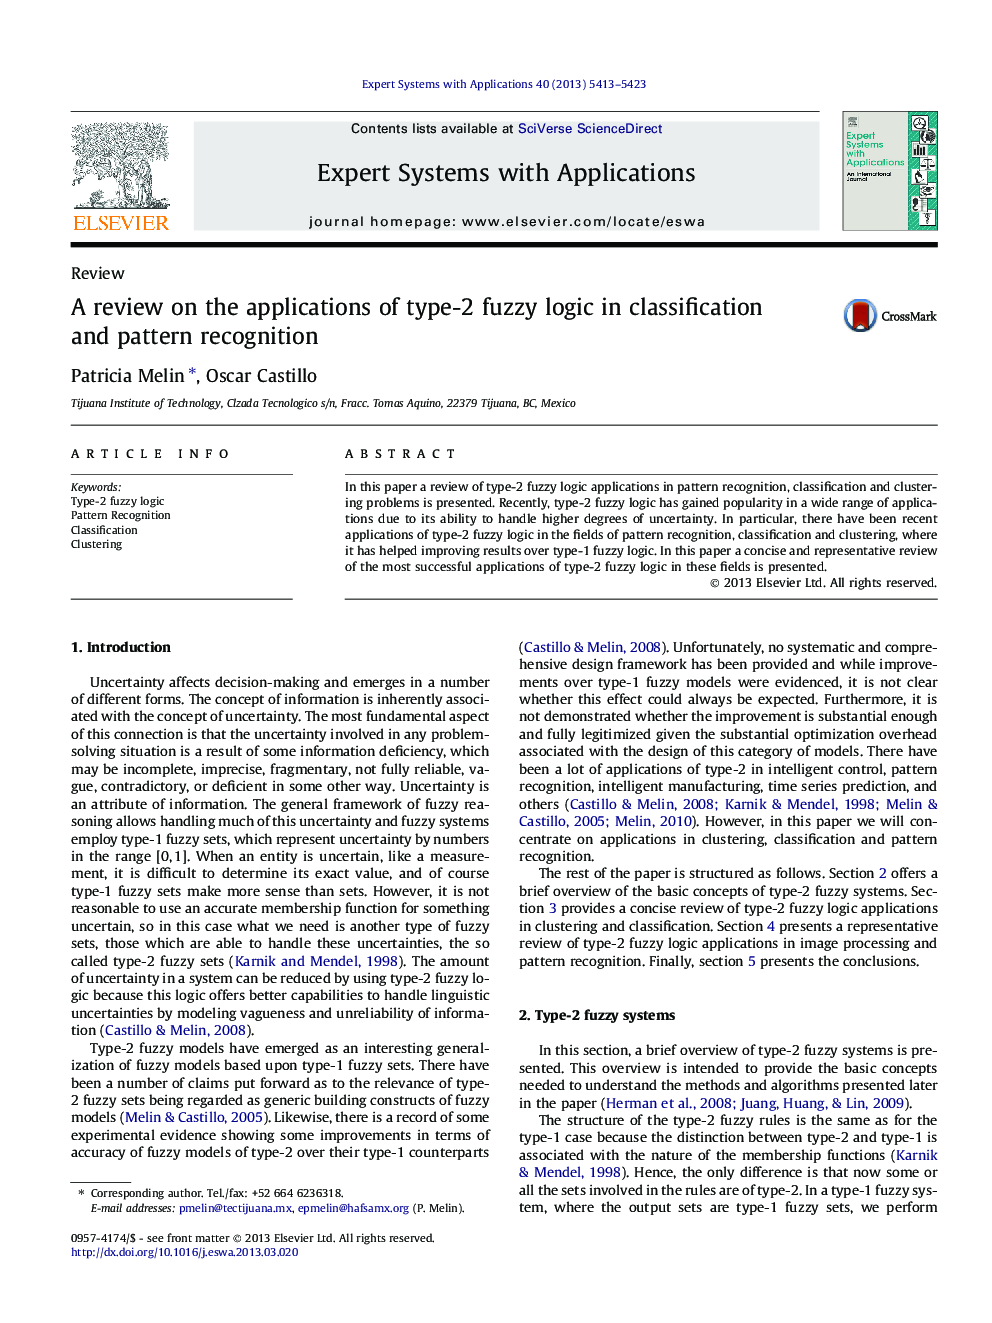 A review on the applications of type-2 fuzzy logic in classification and pattern recognition